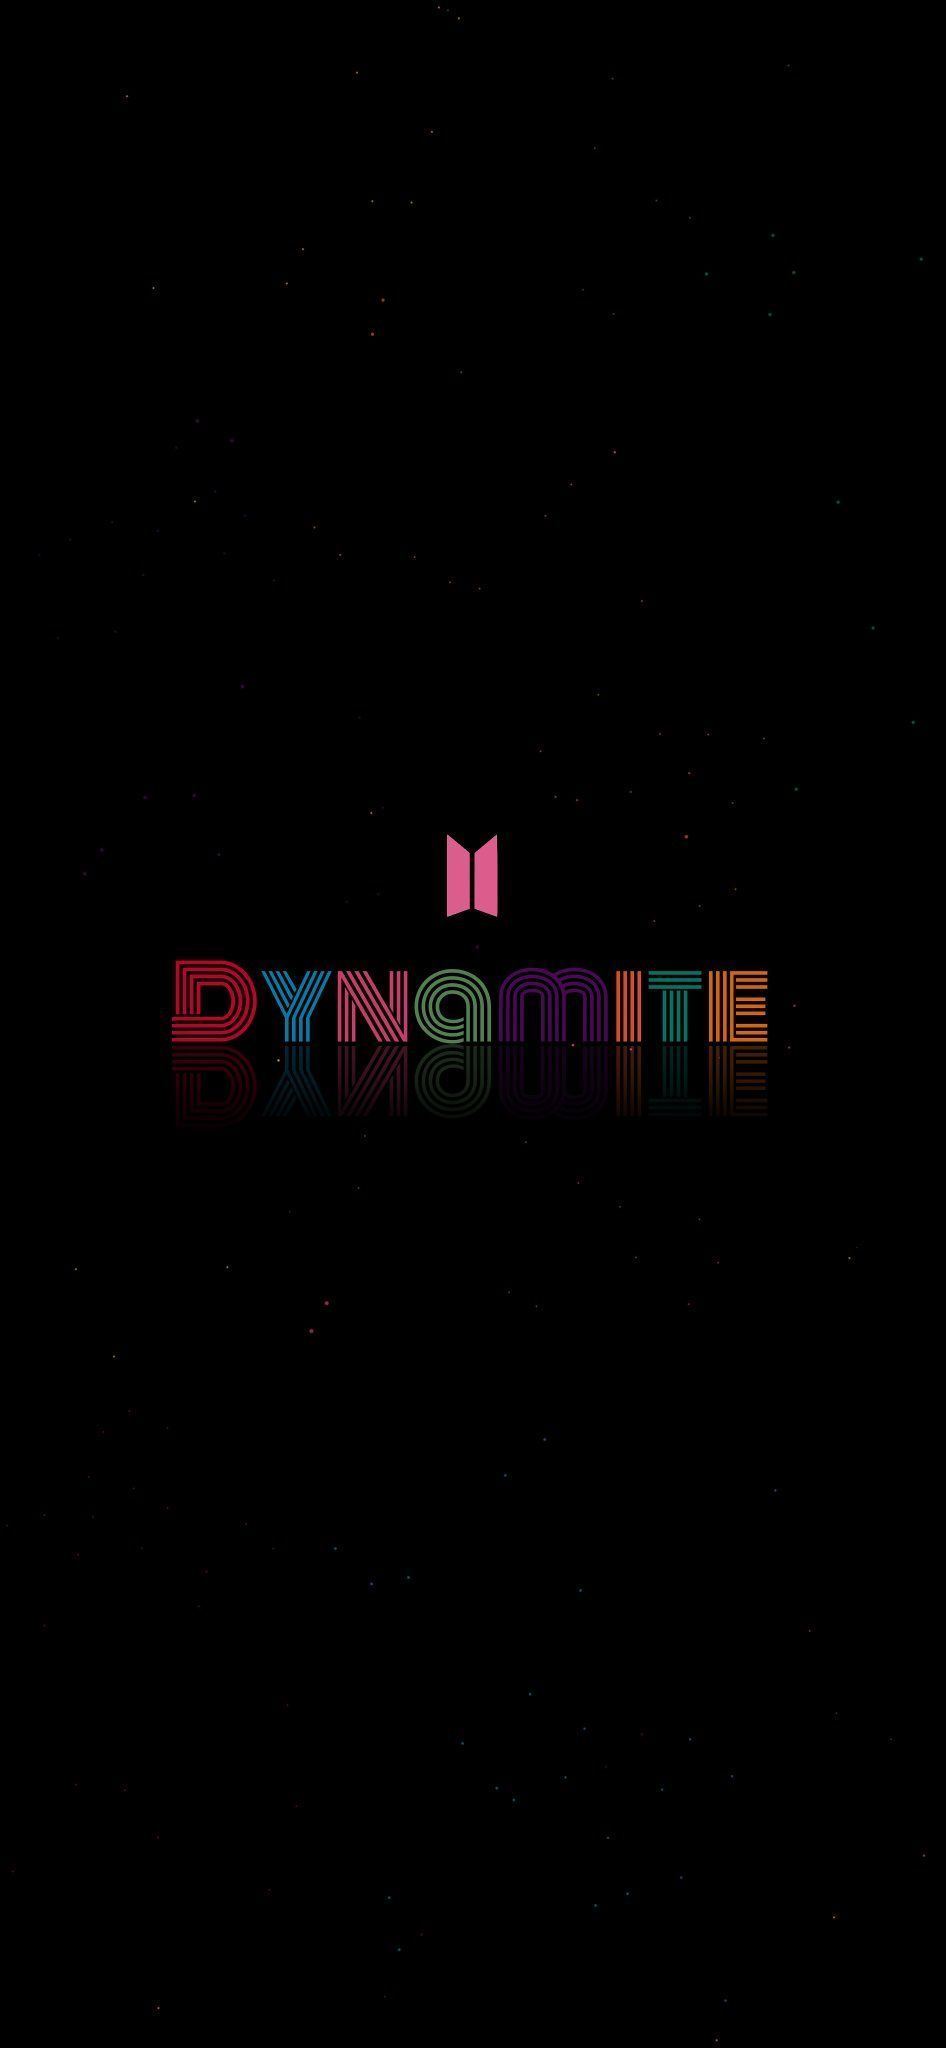 Featured image of post Bts Dynamite High Quality Bts Wallpaper Desktop Bts released their first english single titled dynamite on august 21 2020 you can check the dynamite mv with screencaps in the mv post